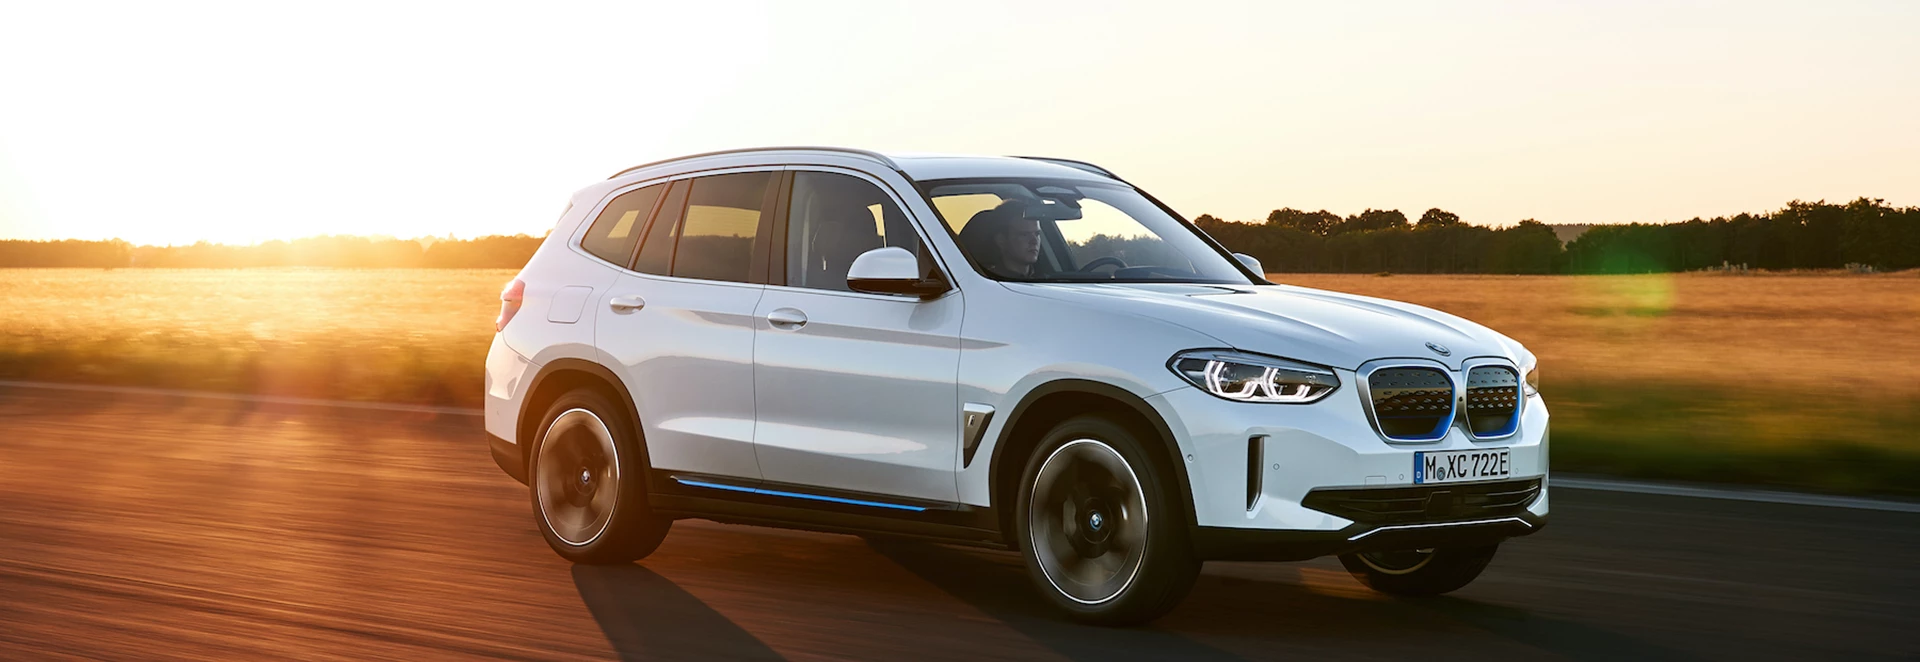 5 key things to know about the BMW iX3 